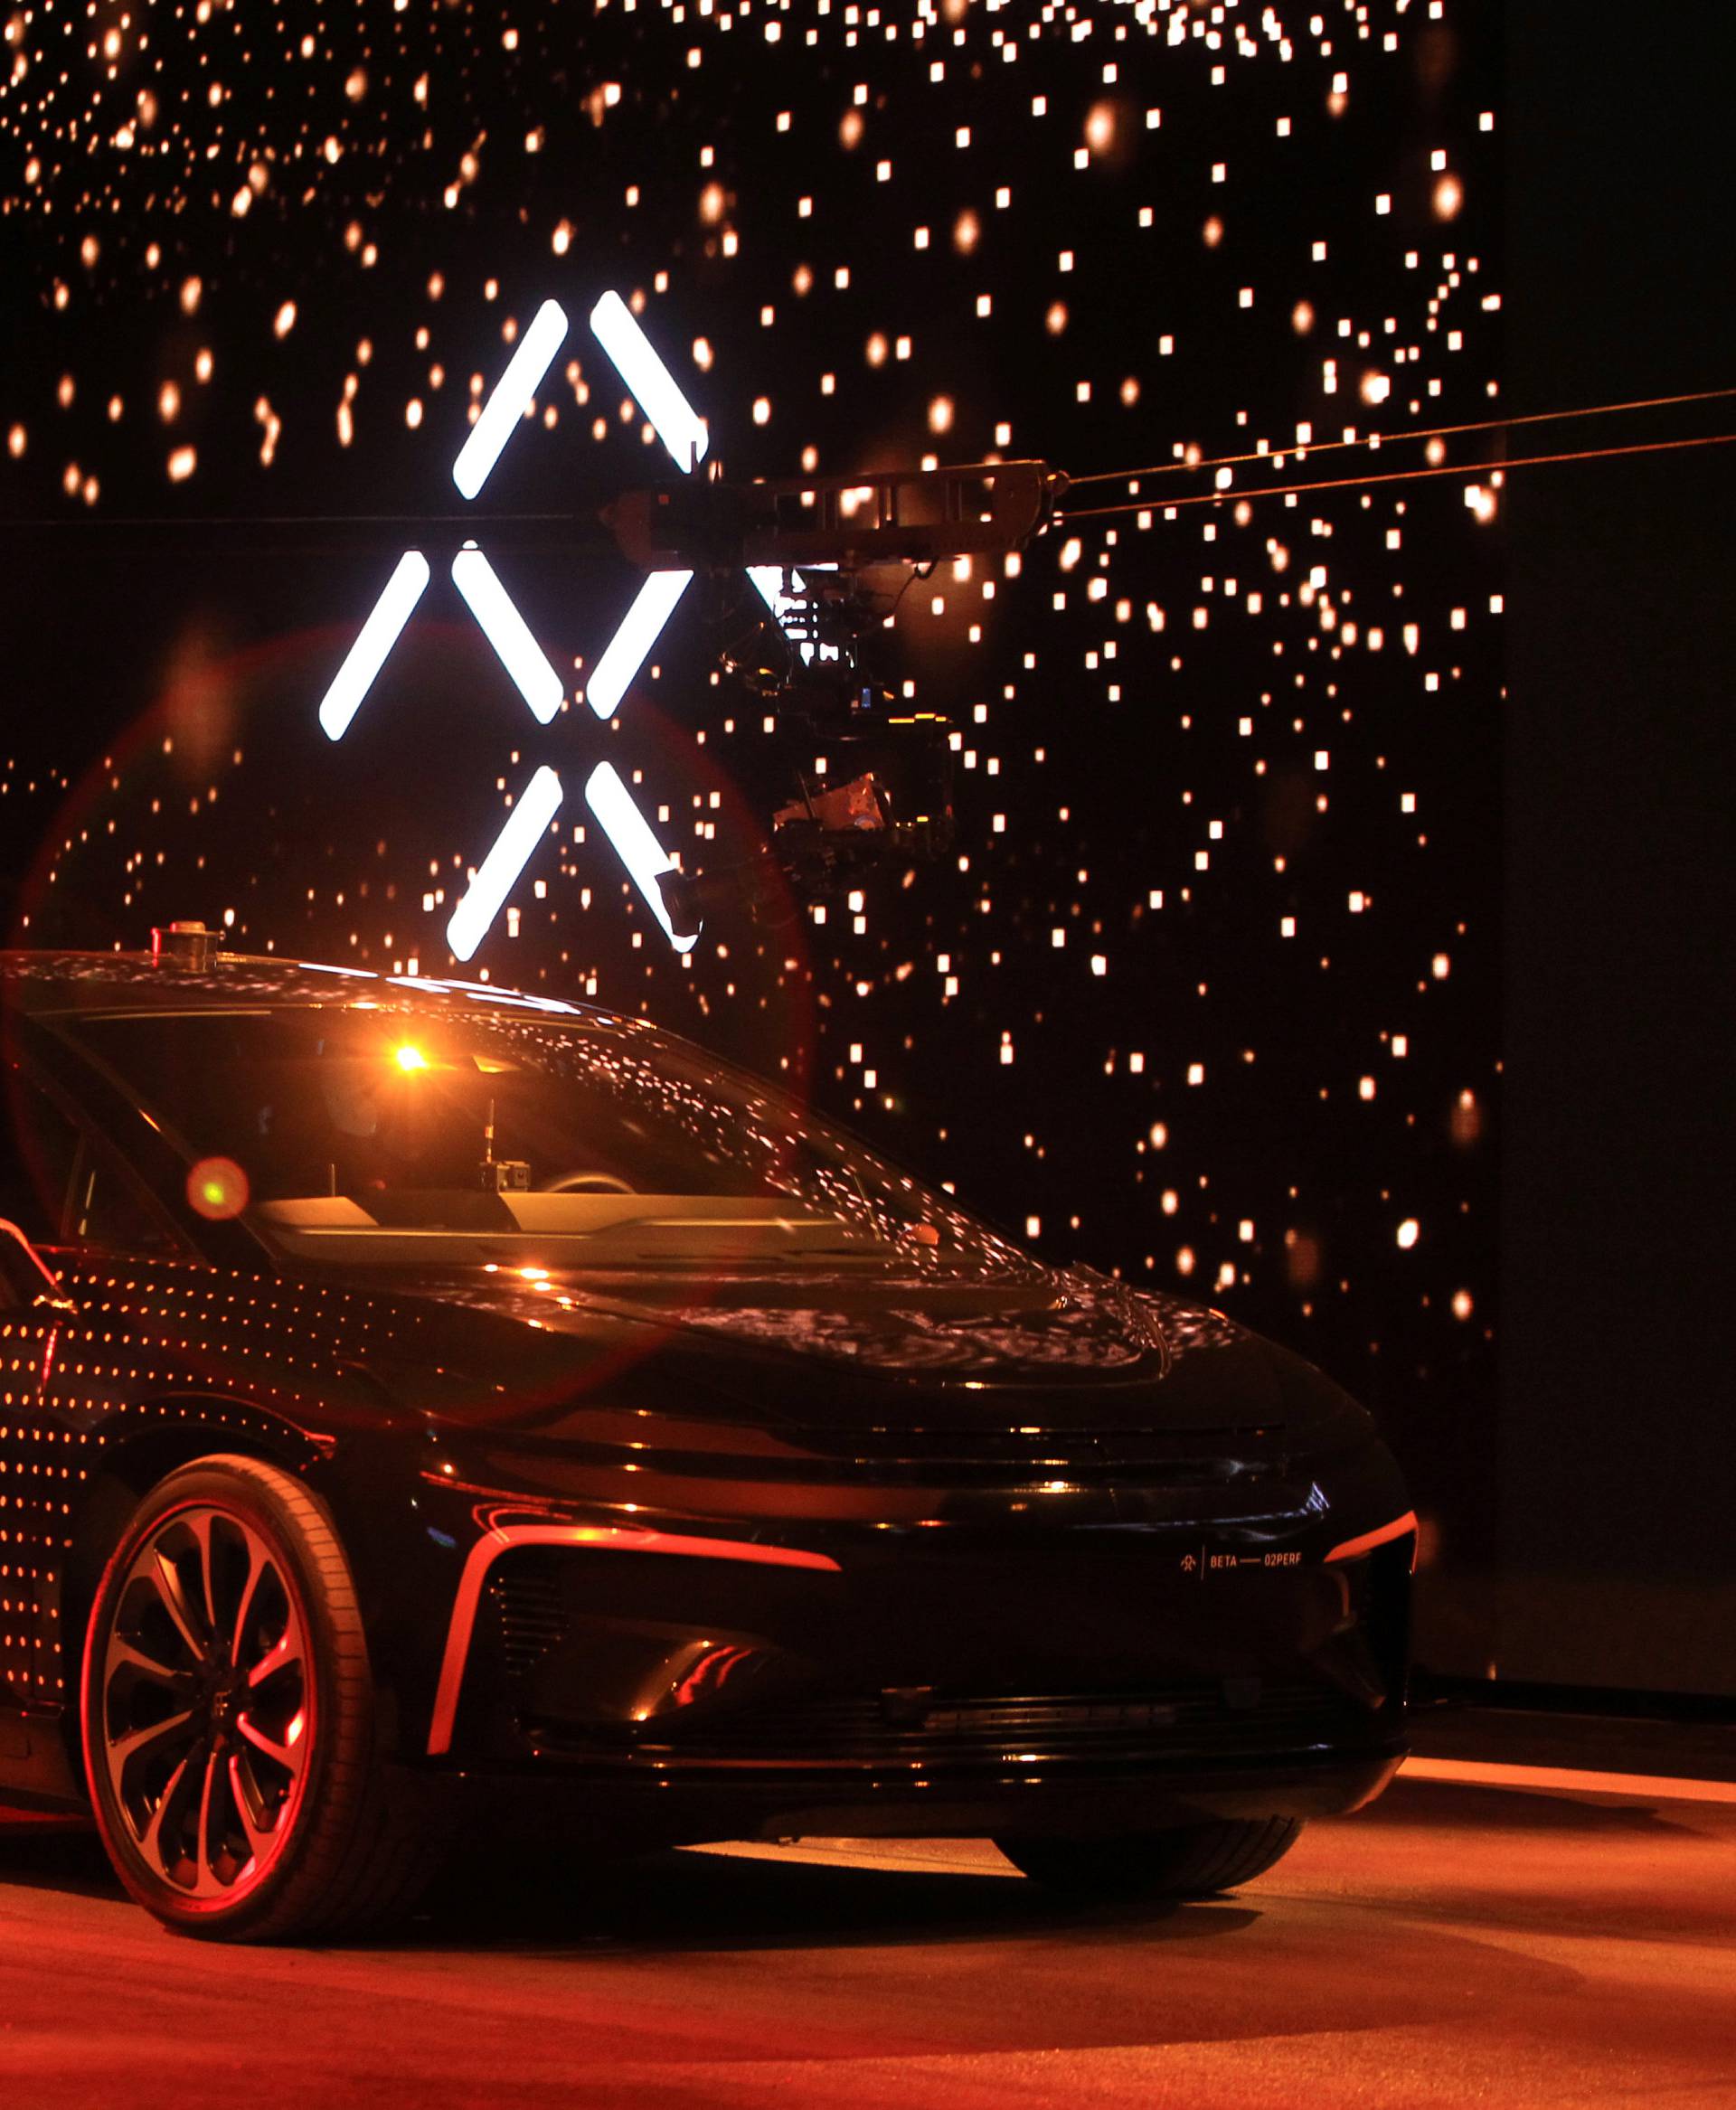 A Faraday Future FF 91 electric car arrives on stage for an exhibition of speed during an unveiling event at CES in Las Vegas